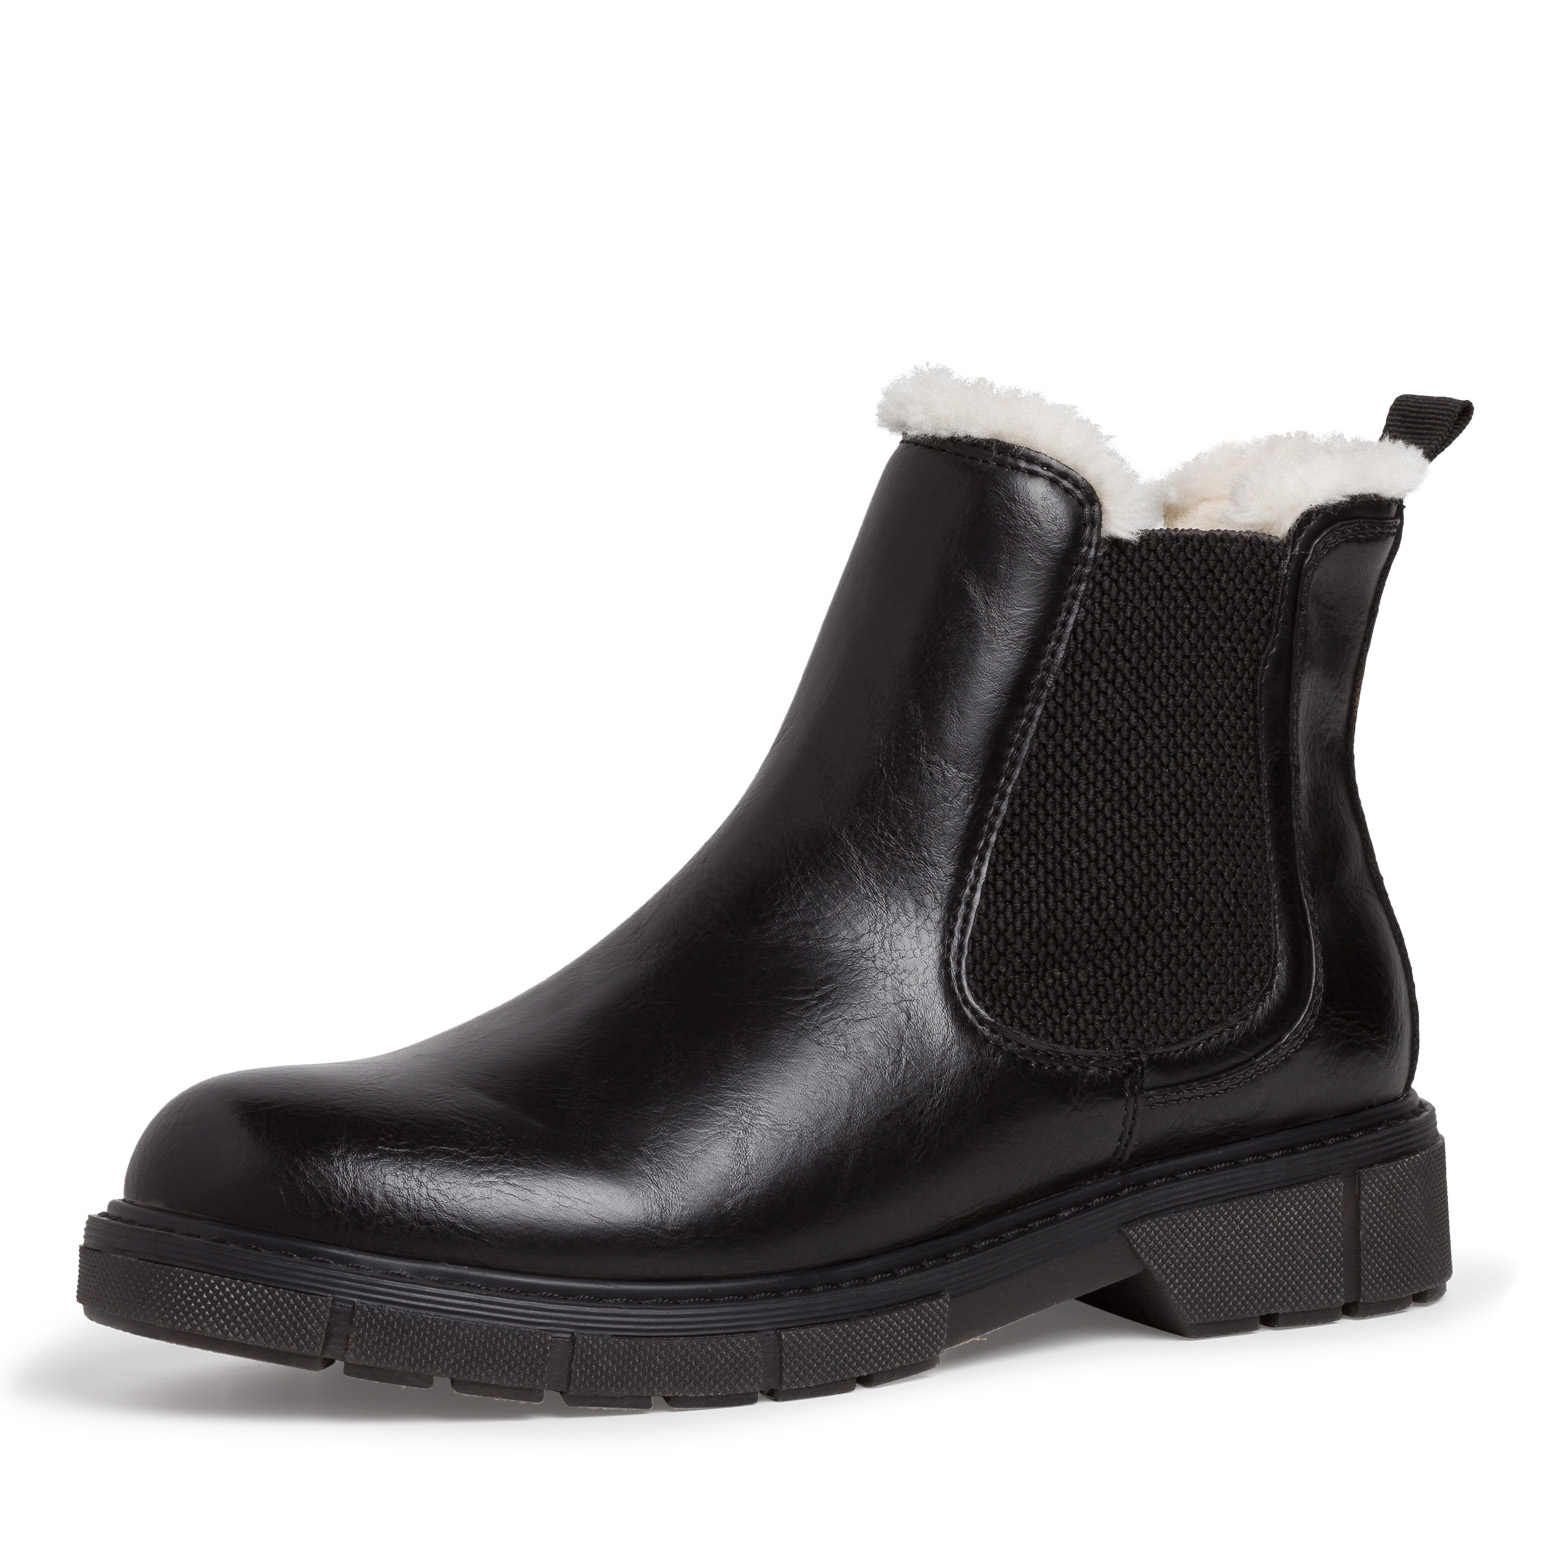 Chelsea boot 2-2-26870-25: Buy Chelsea boots from Marco Tozzi online!